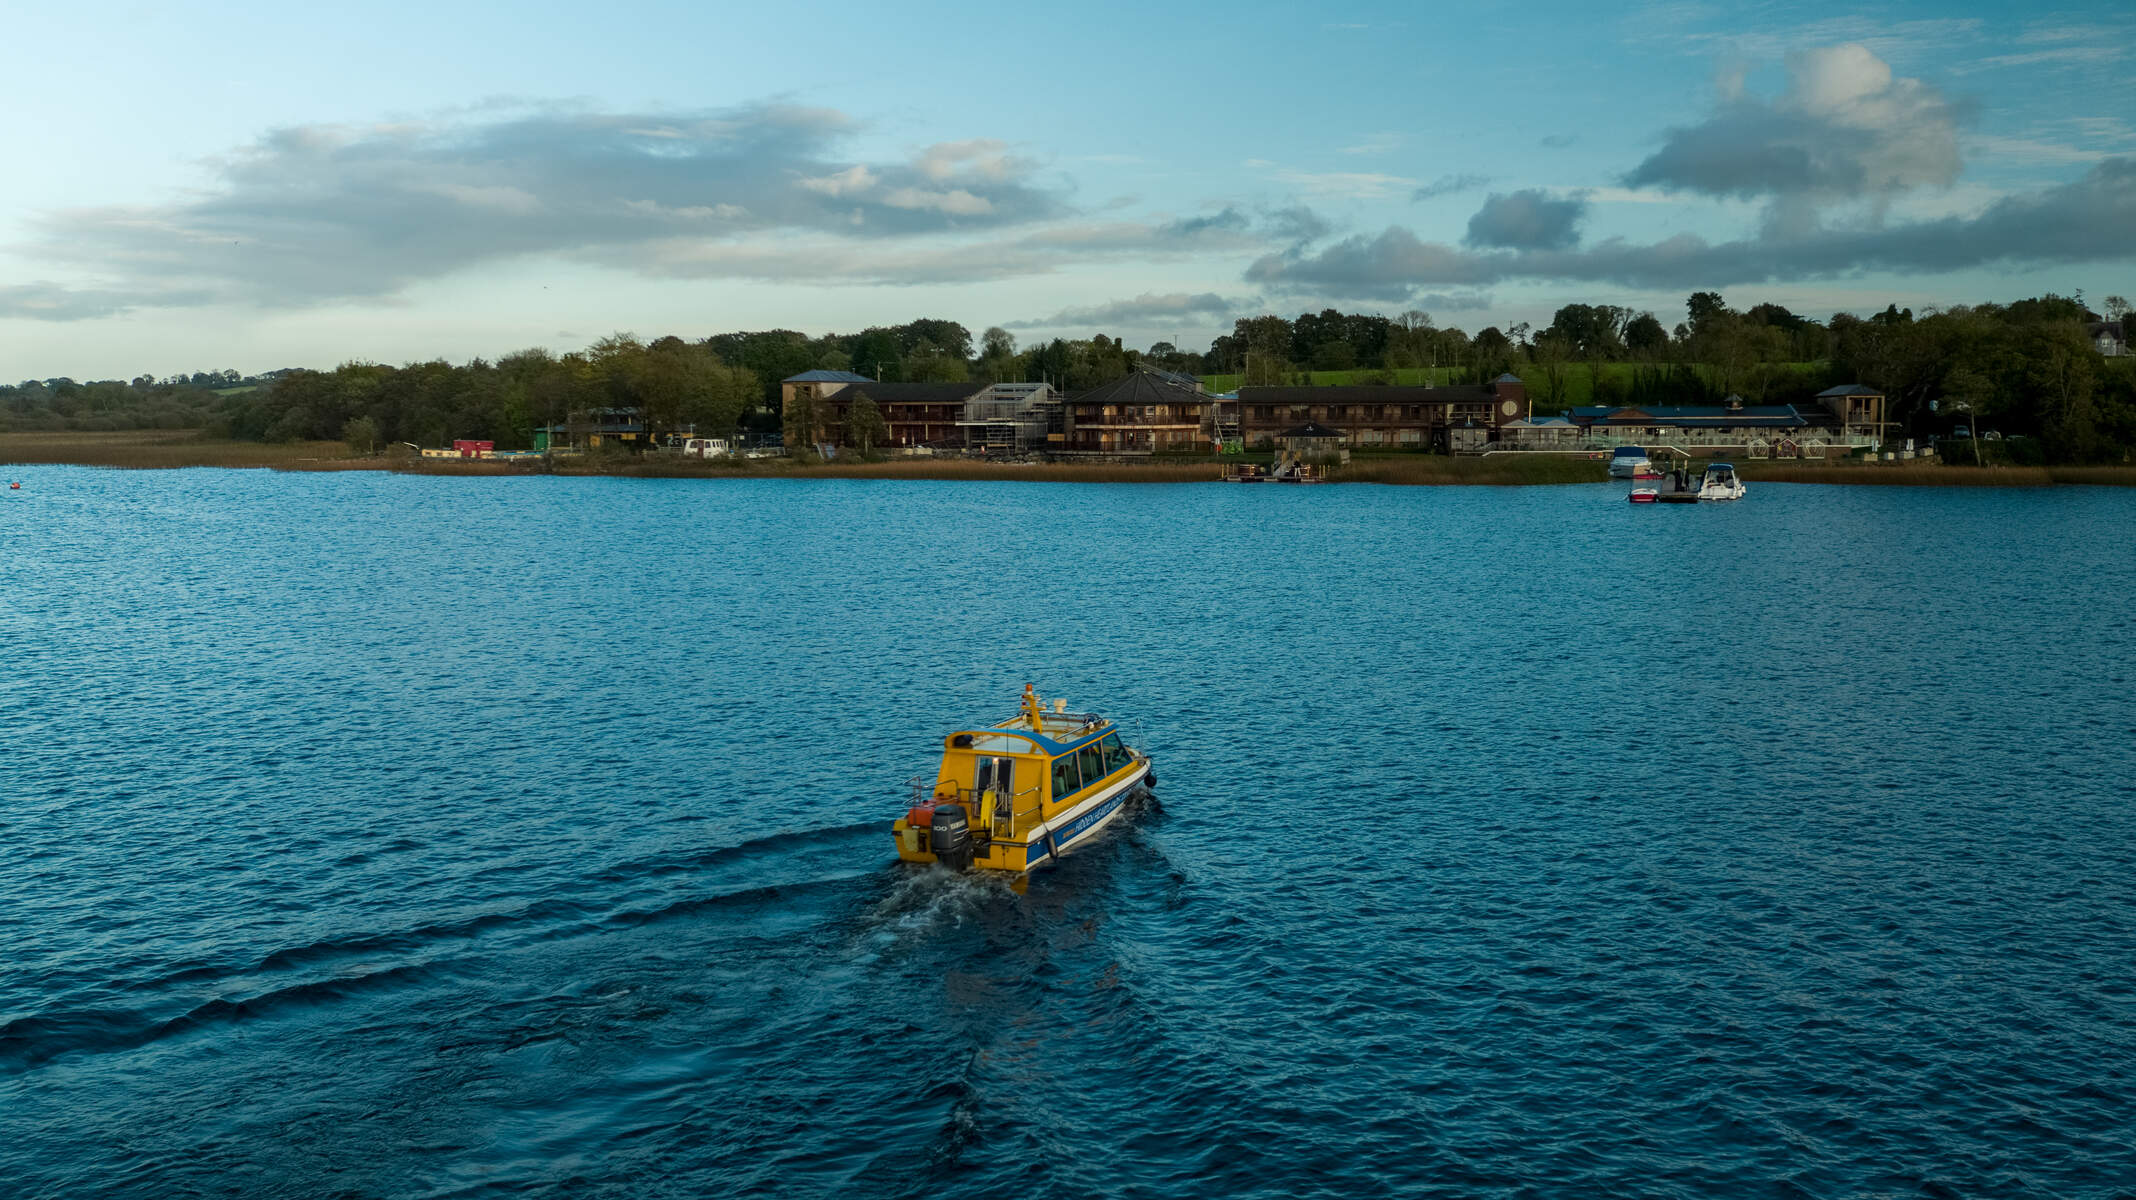 Water taxi Wineport Lodge Athlone Westmeath Web Size